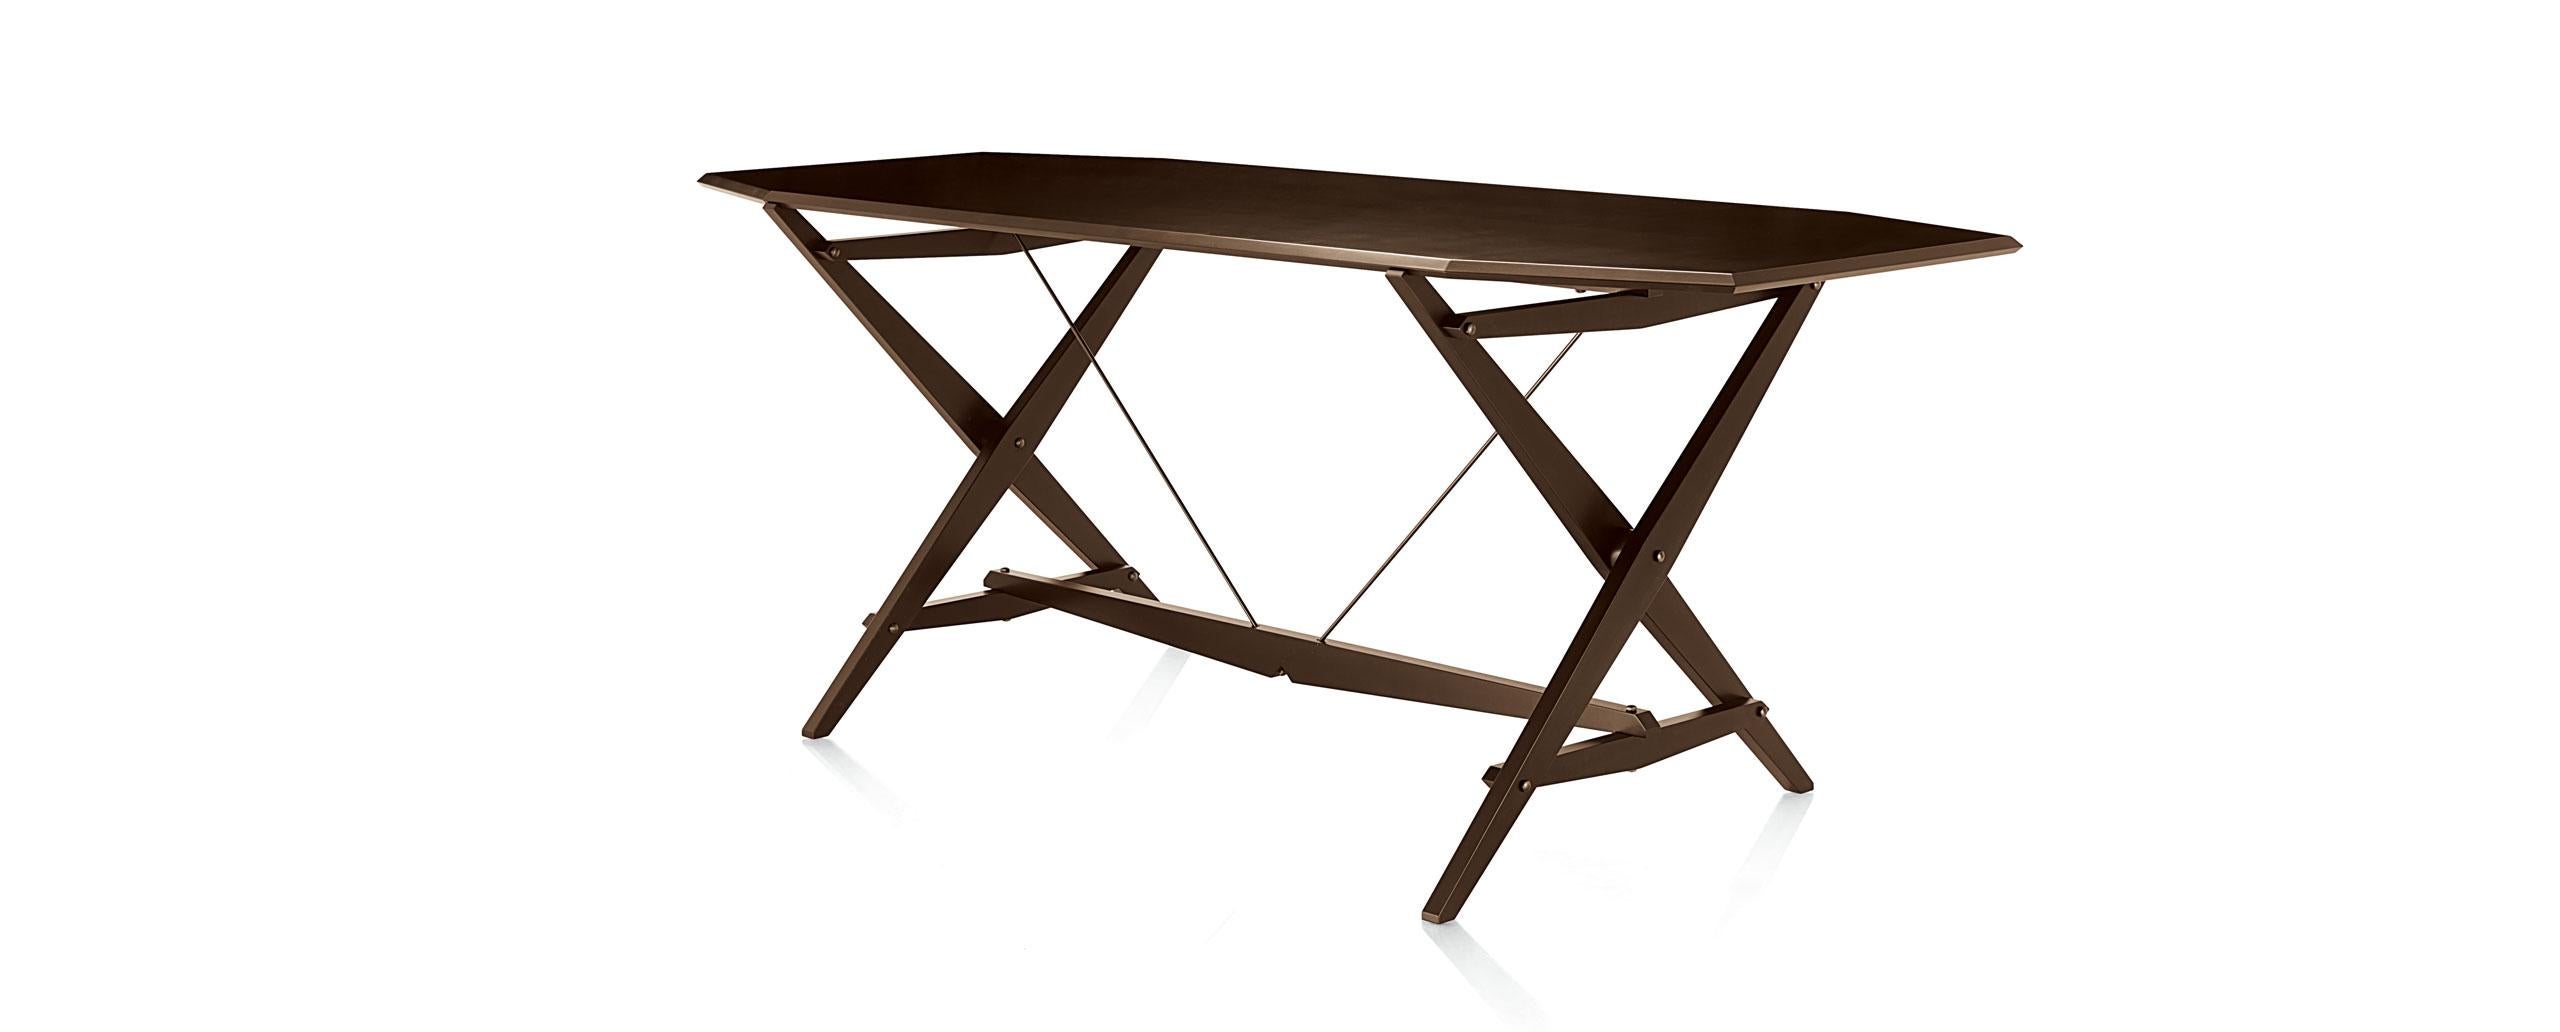 Contemporary Franco Albini Cavalletto Table, Black Stained Wood by Cassina